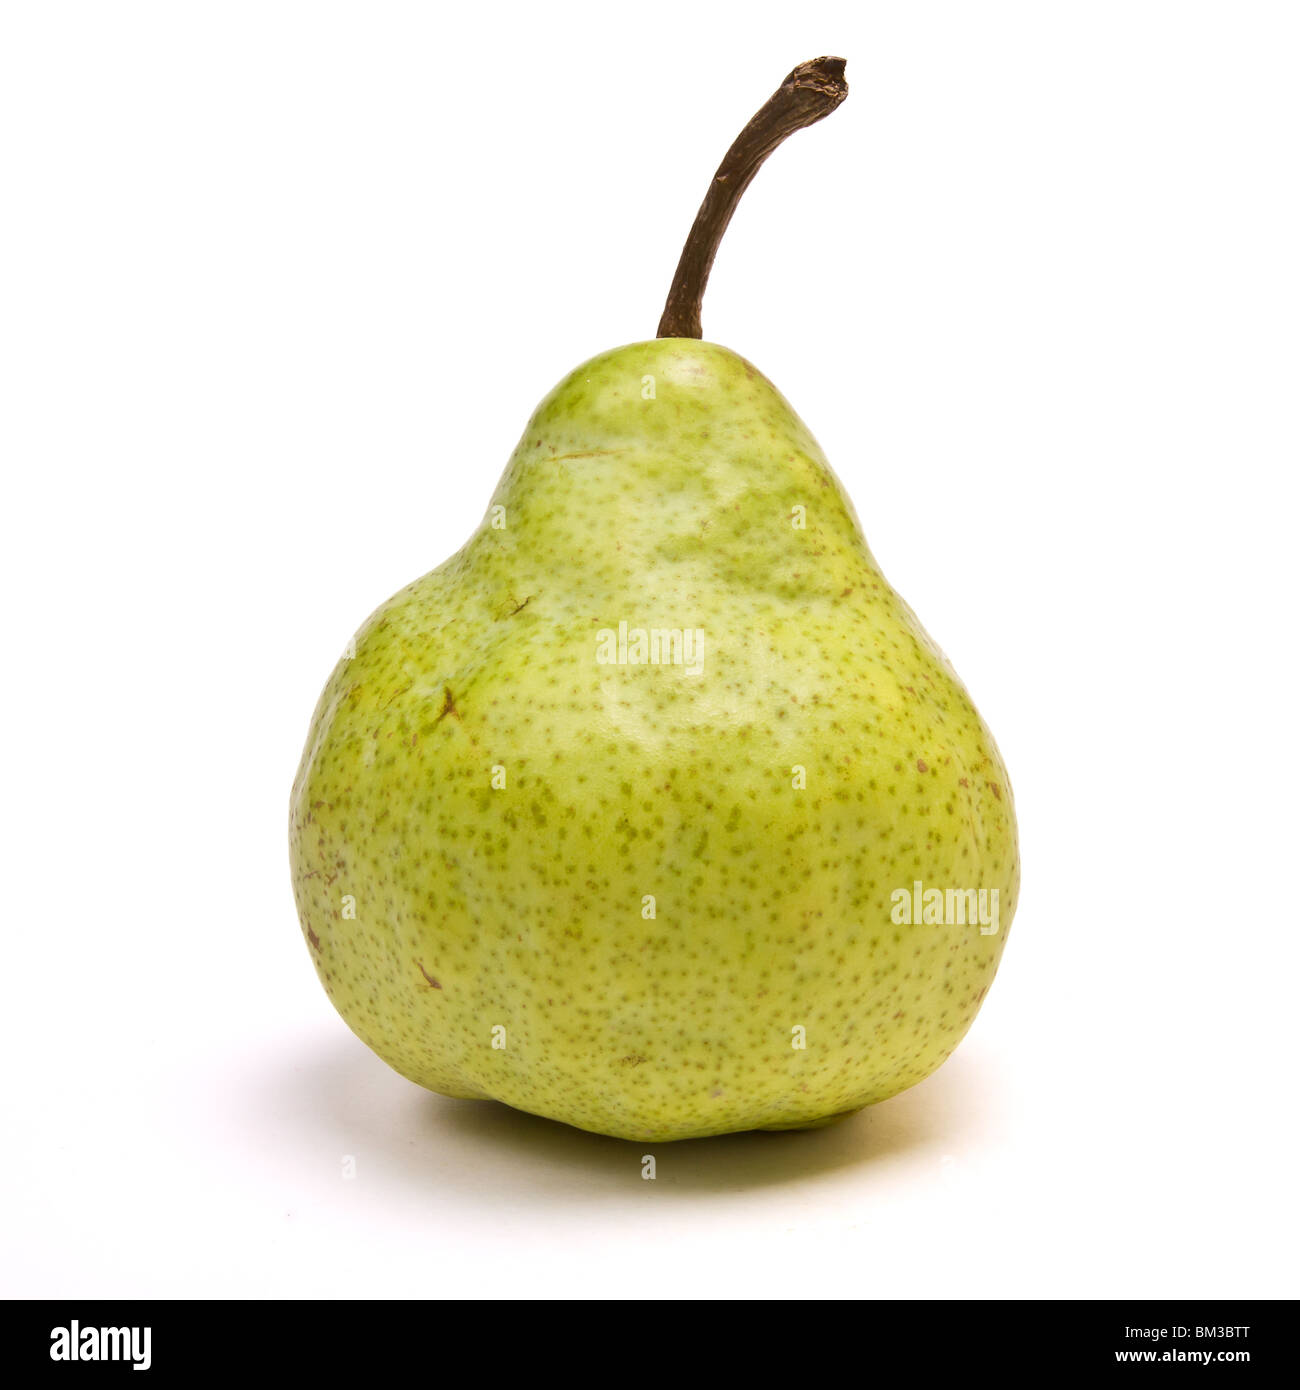 Packham Pear from low perspective isolated against white background. Stock Photo